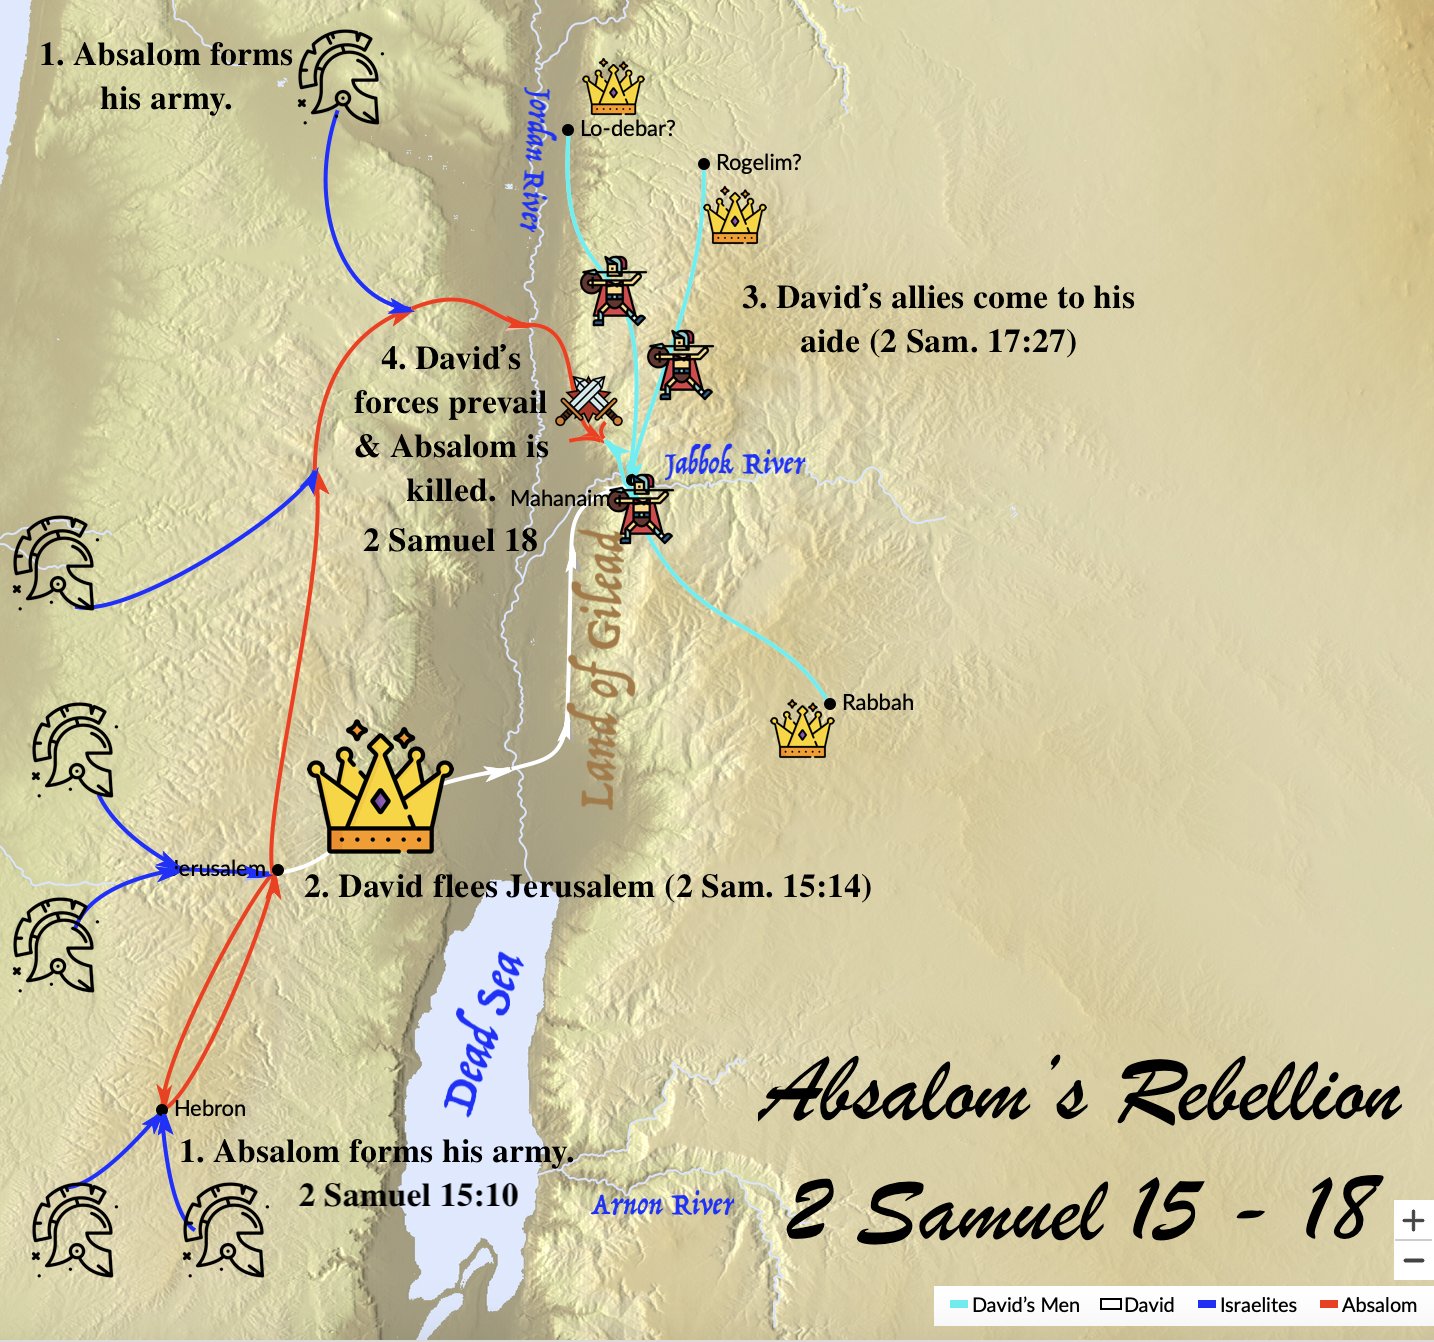 King David of Israel faced an uprising led by his own son Absalom.